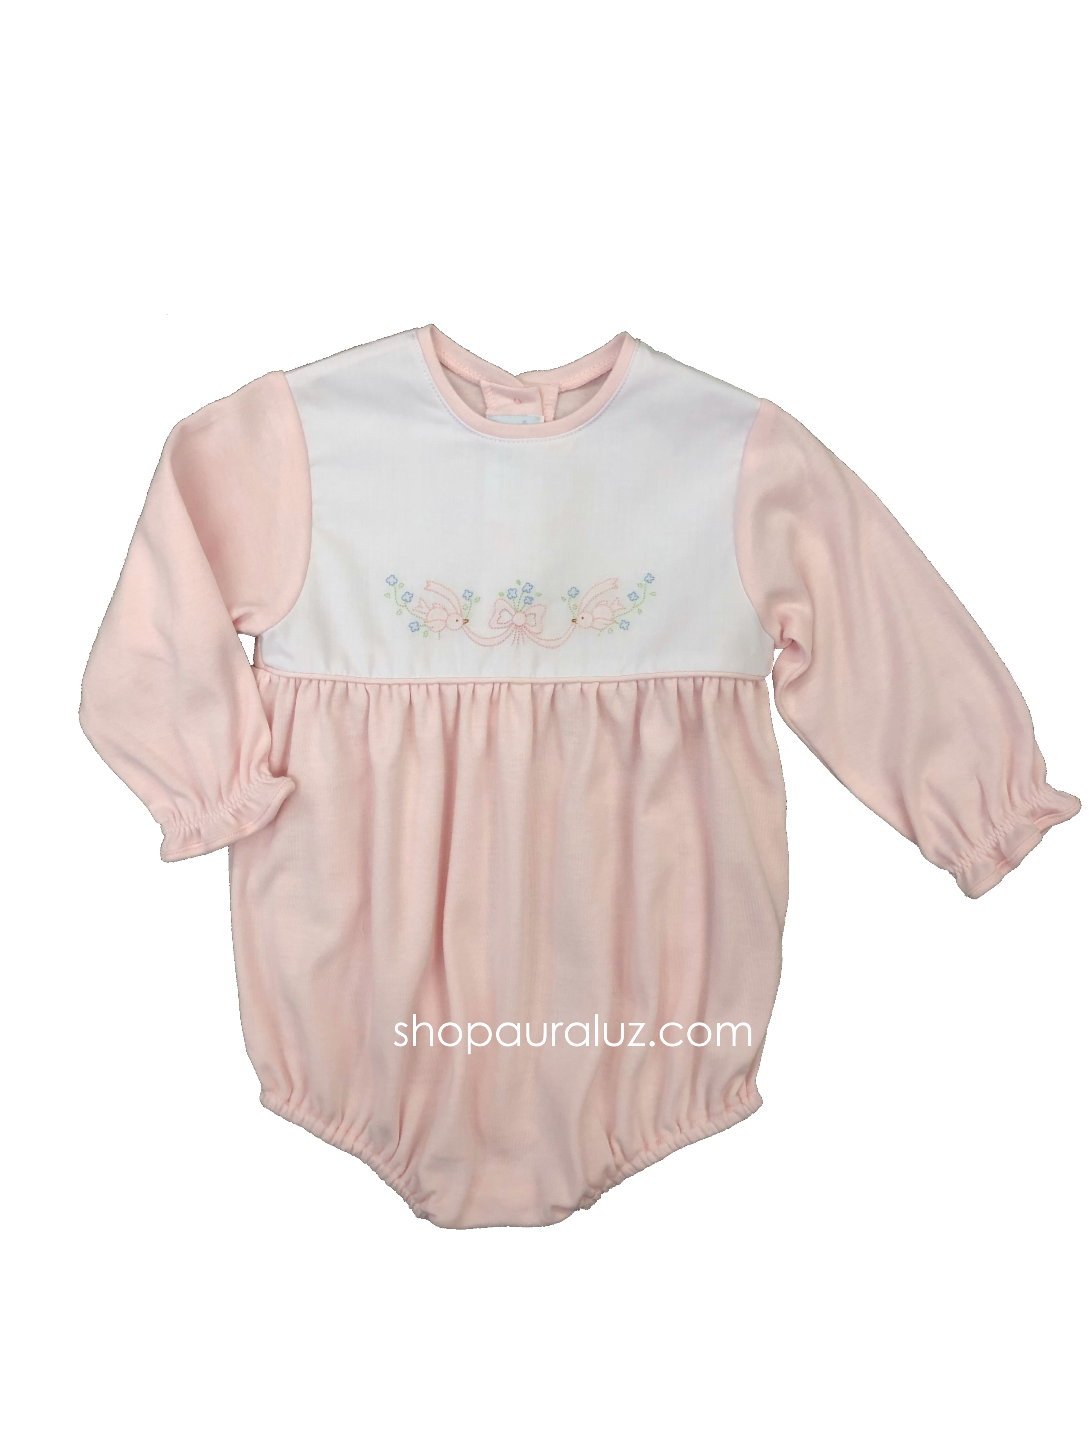 Auraluz Knit Bubble l/s...Pink with no collar and embroidered doves with ribbon